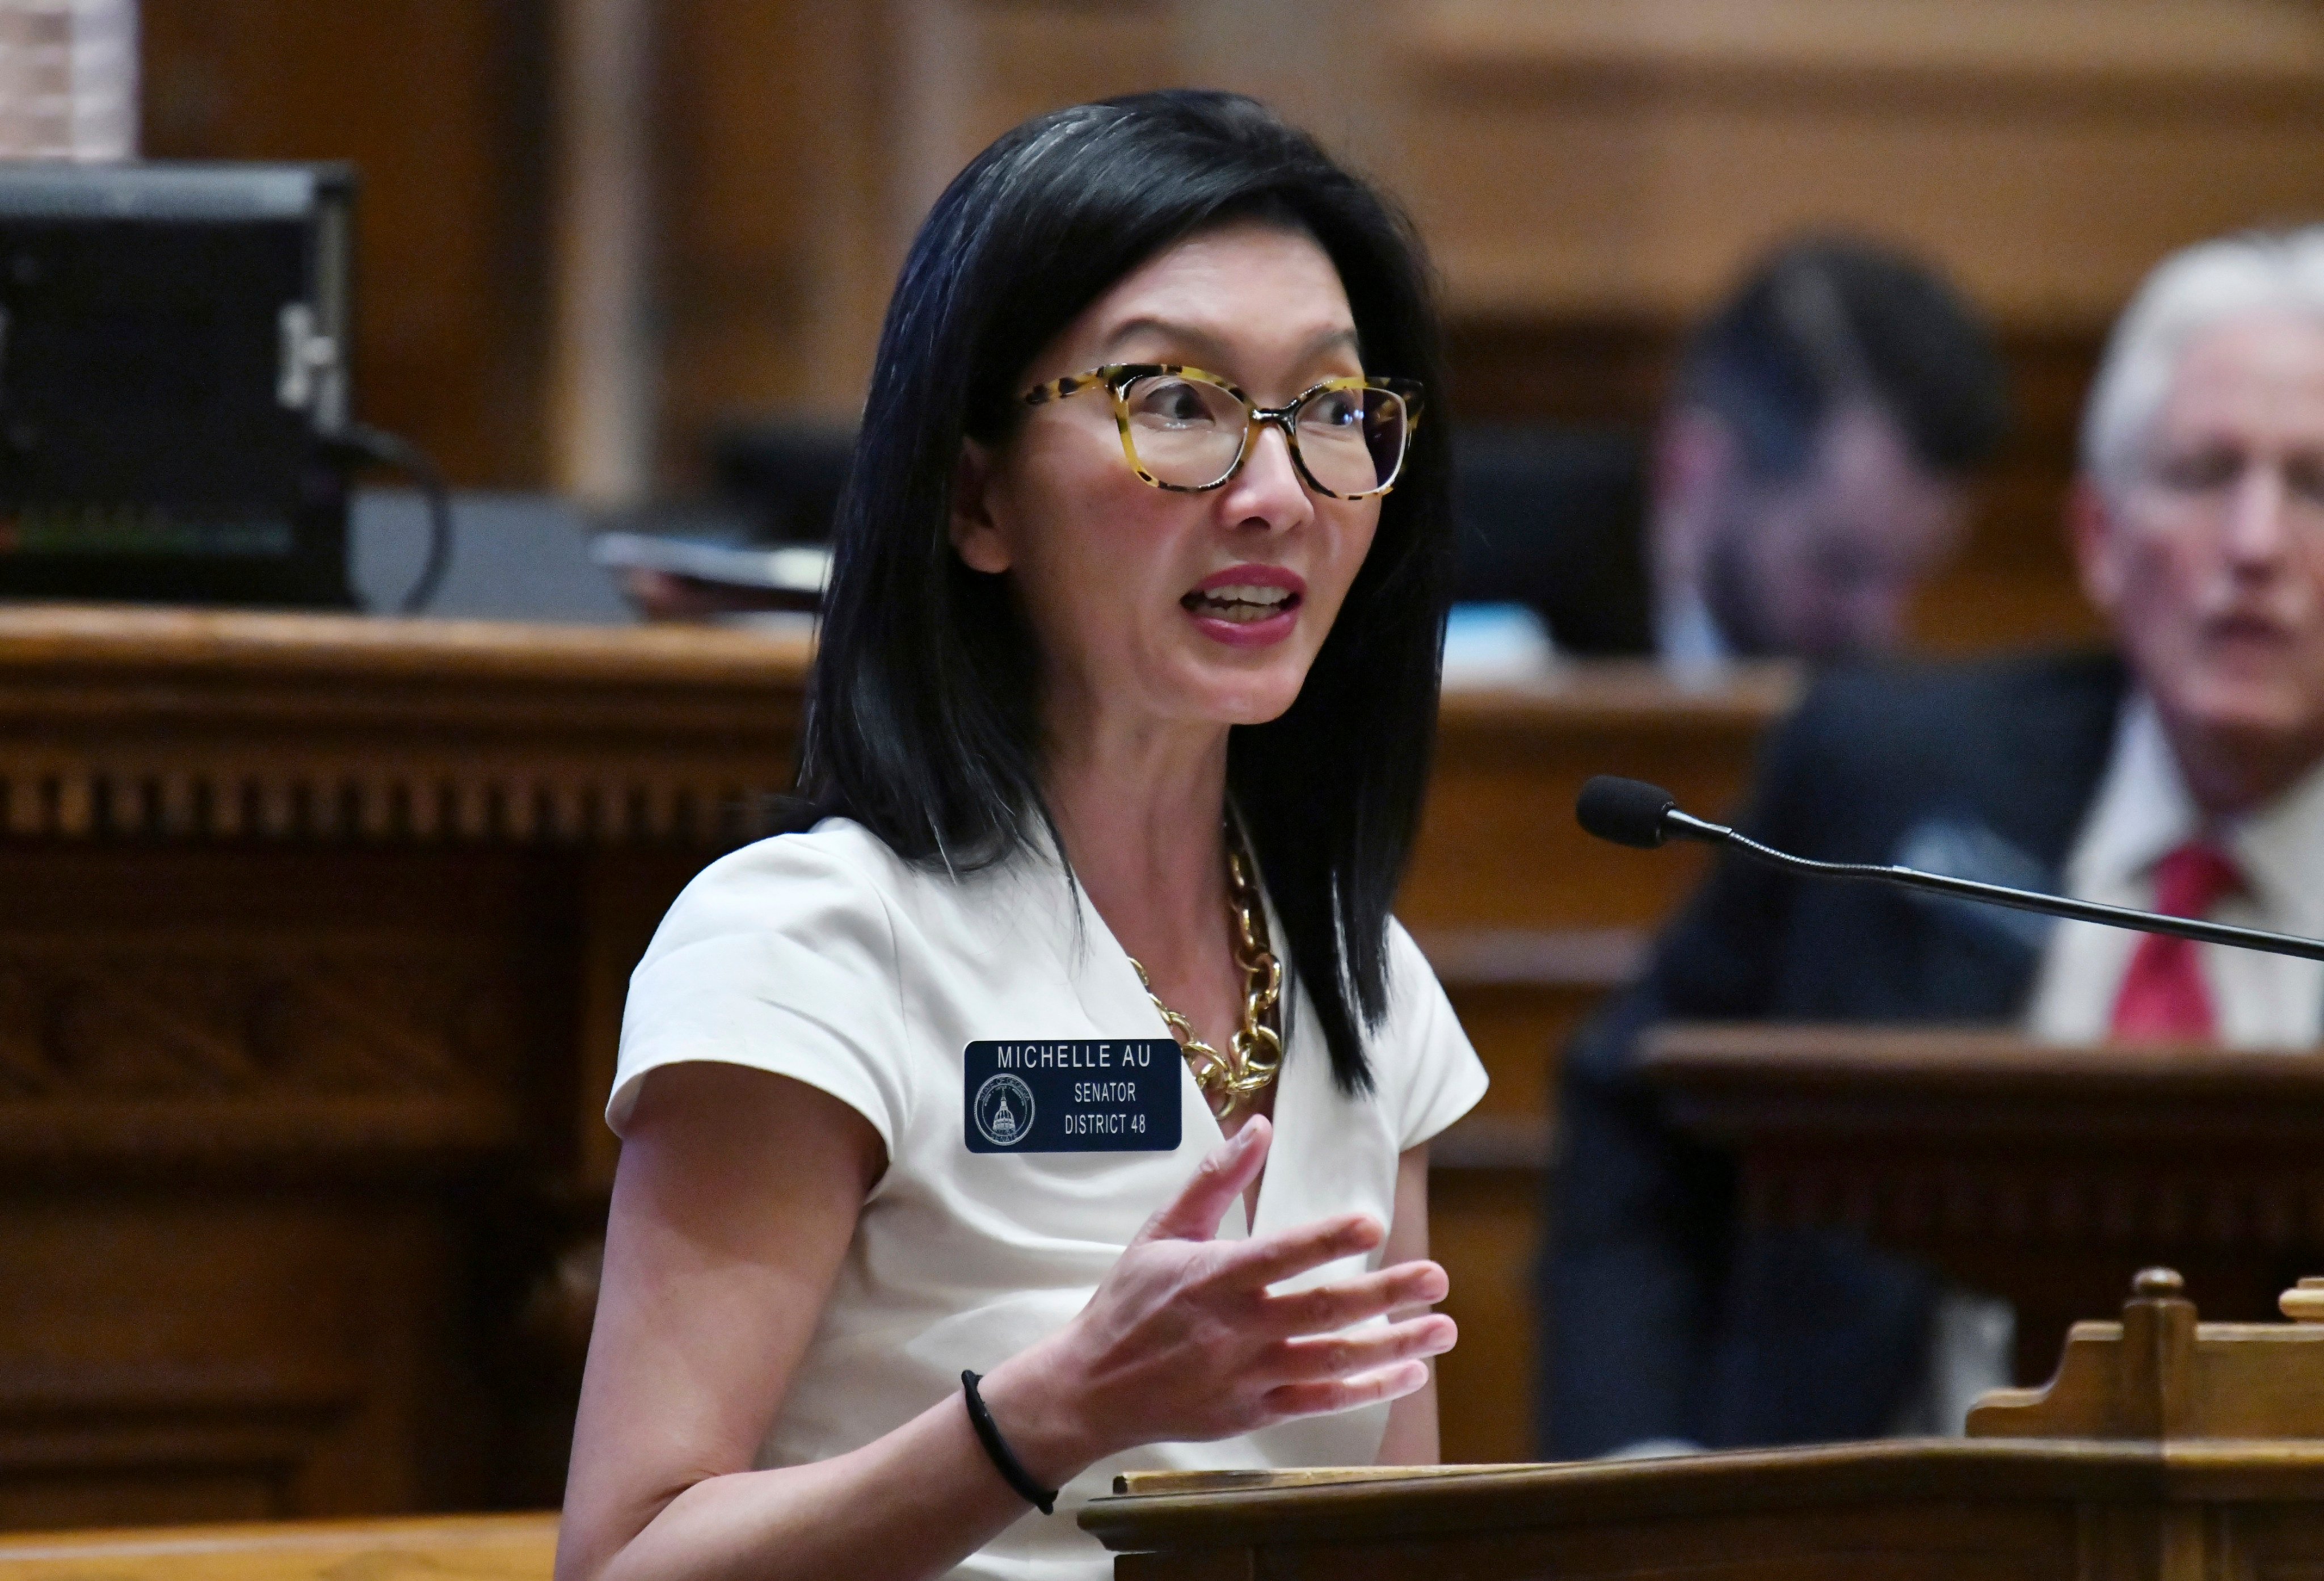 Georgia Senator Michelle Au speaks at the state capitol in November 2021. Au, who is Chinese-American, said she has been accused during her time in the General Assembly of being an “agent of the Chinese Community Party, a spy, a plant, un-American and a foreign asset”. Photo: Atlanta Journal-Constitution via AP